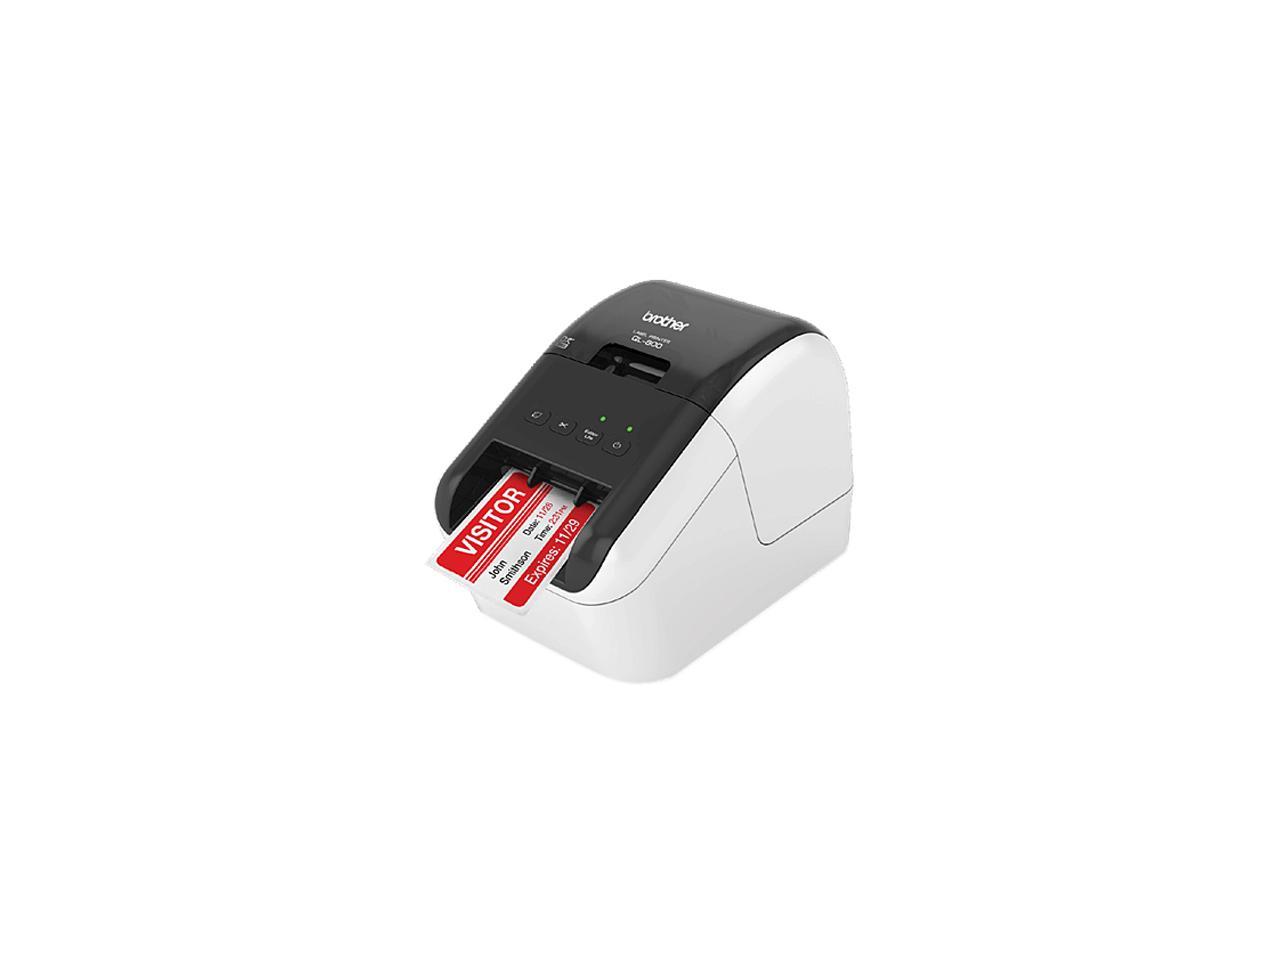 Brother QL-800 High-Speed Professional Label Printer, Black & Red Printing - image 2 of 9